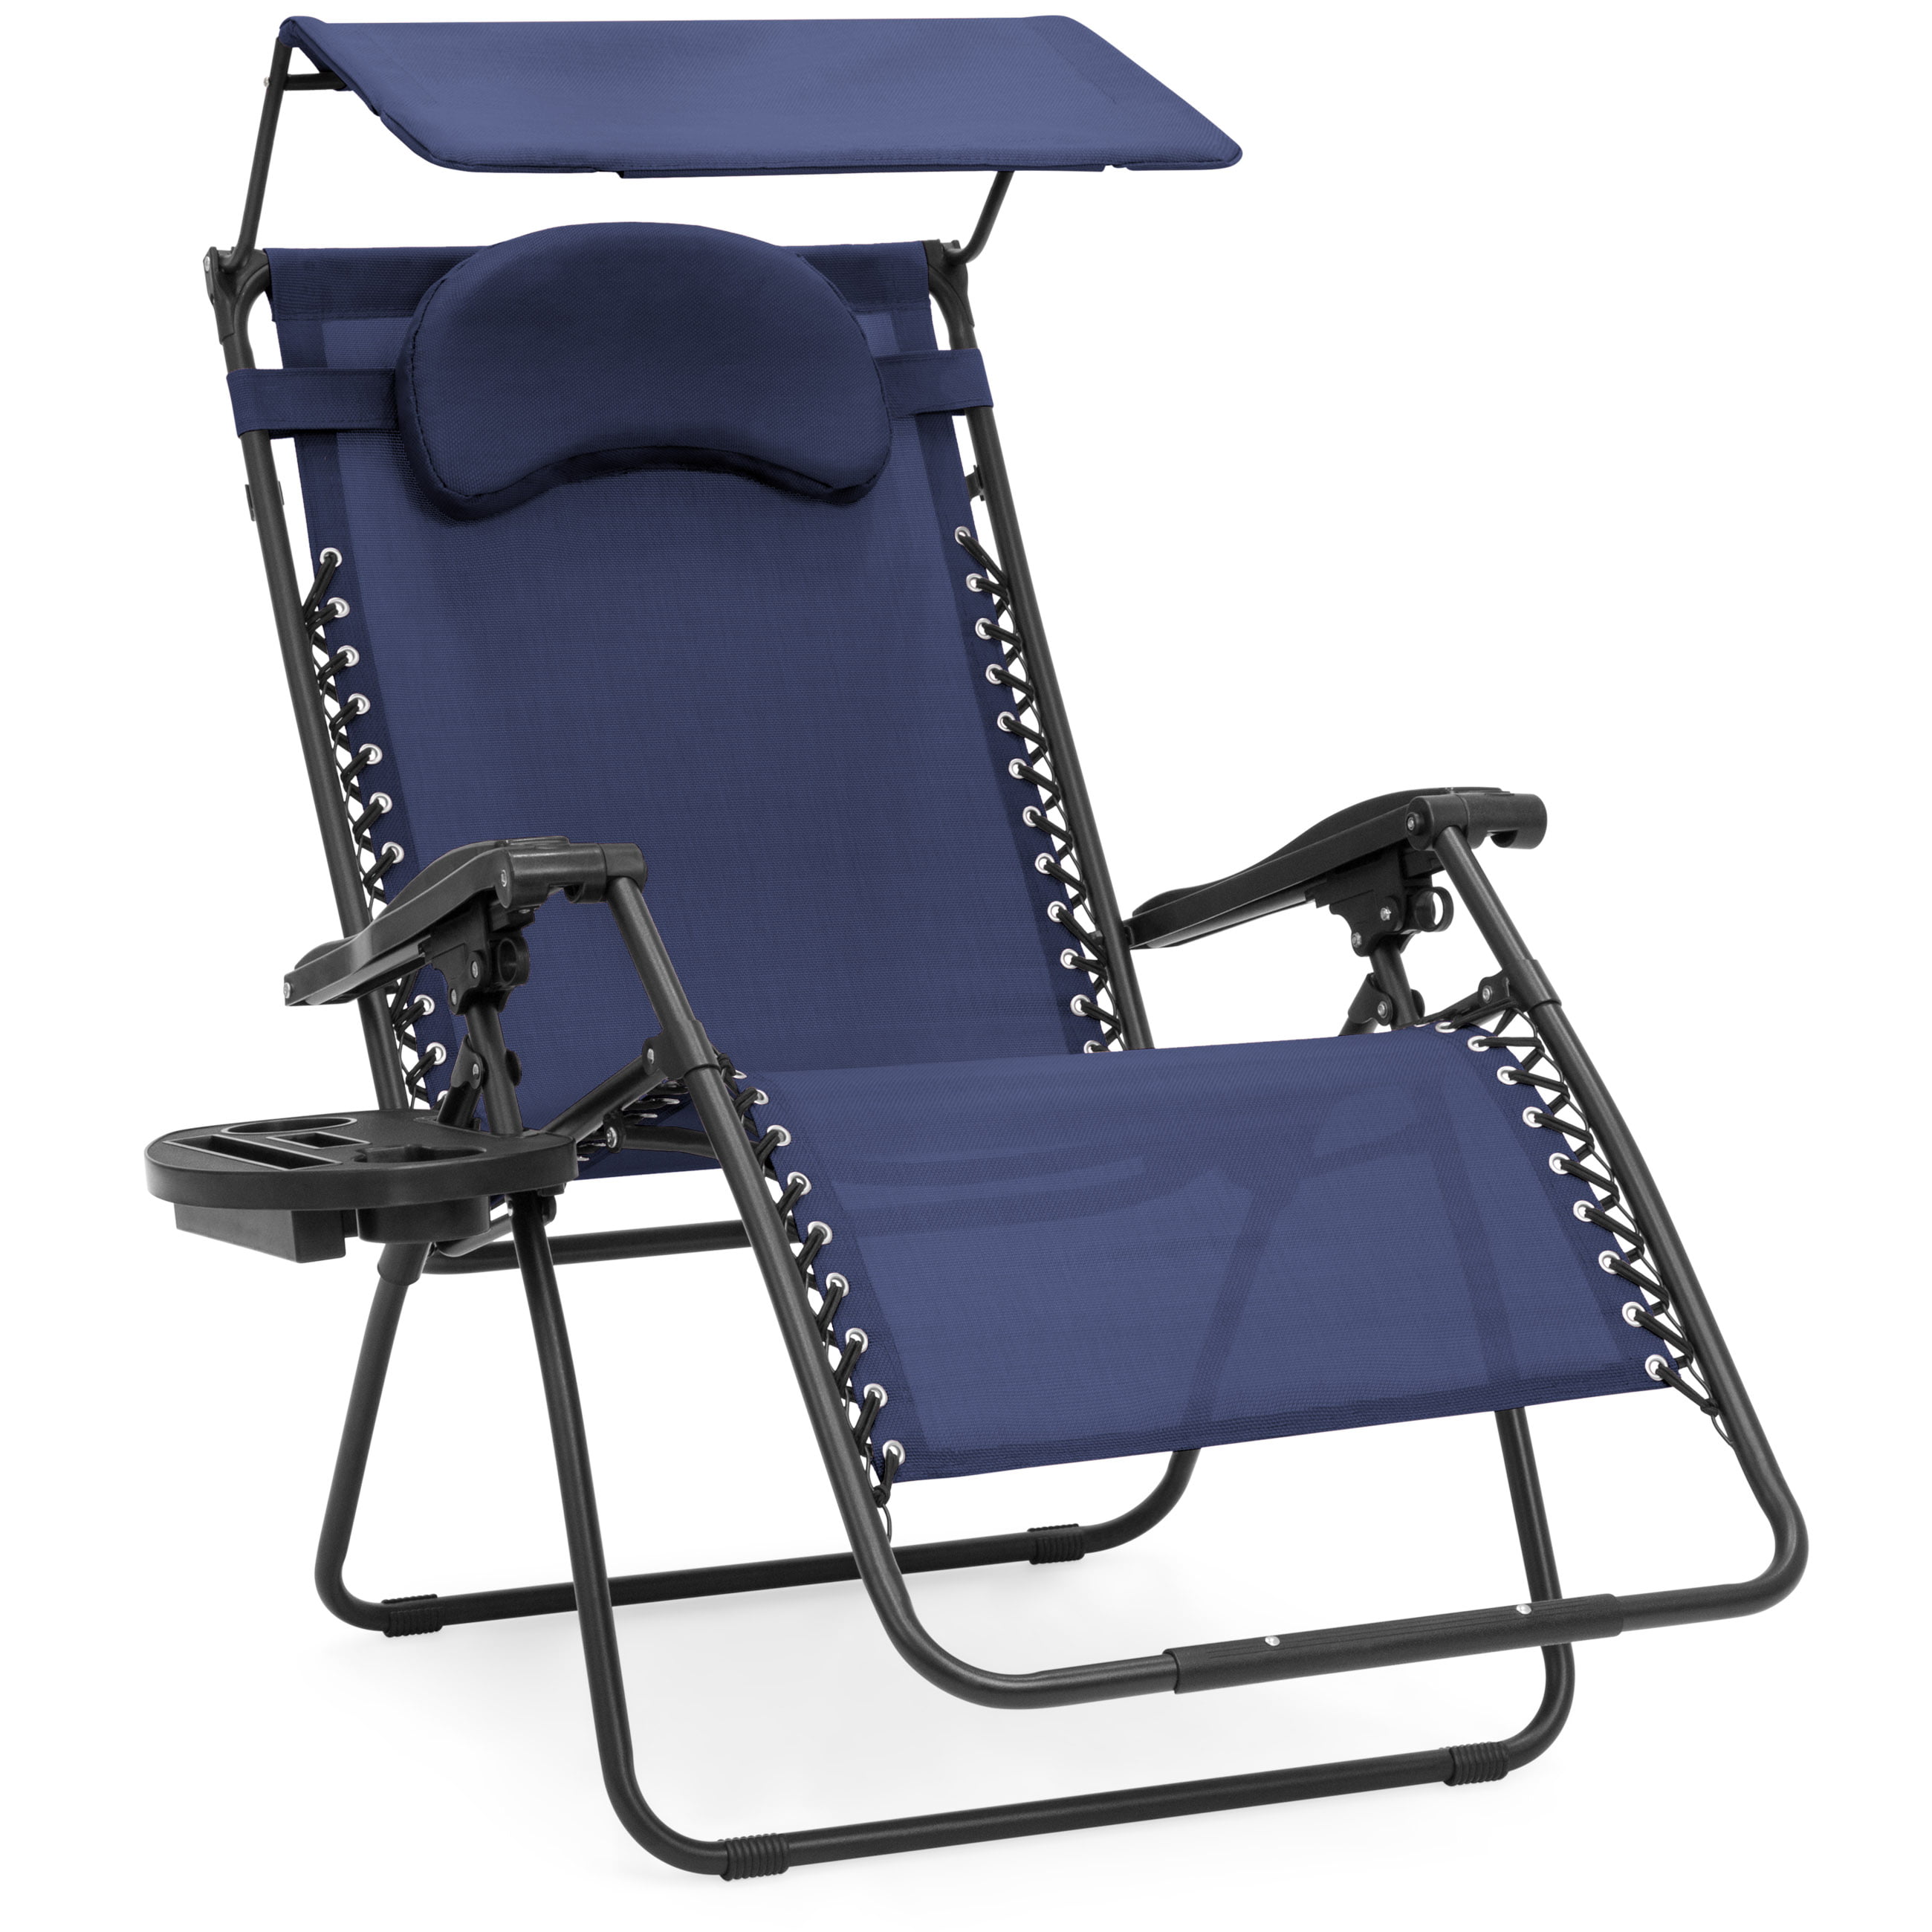 Best Choice Products Folding Zero Gravity Recliner Lounge Chair W/Canopy Shade & Magazine Cup Holder-Navy Blue 